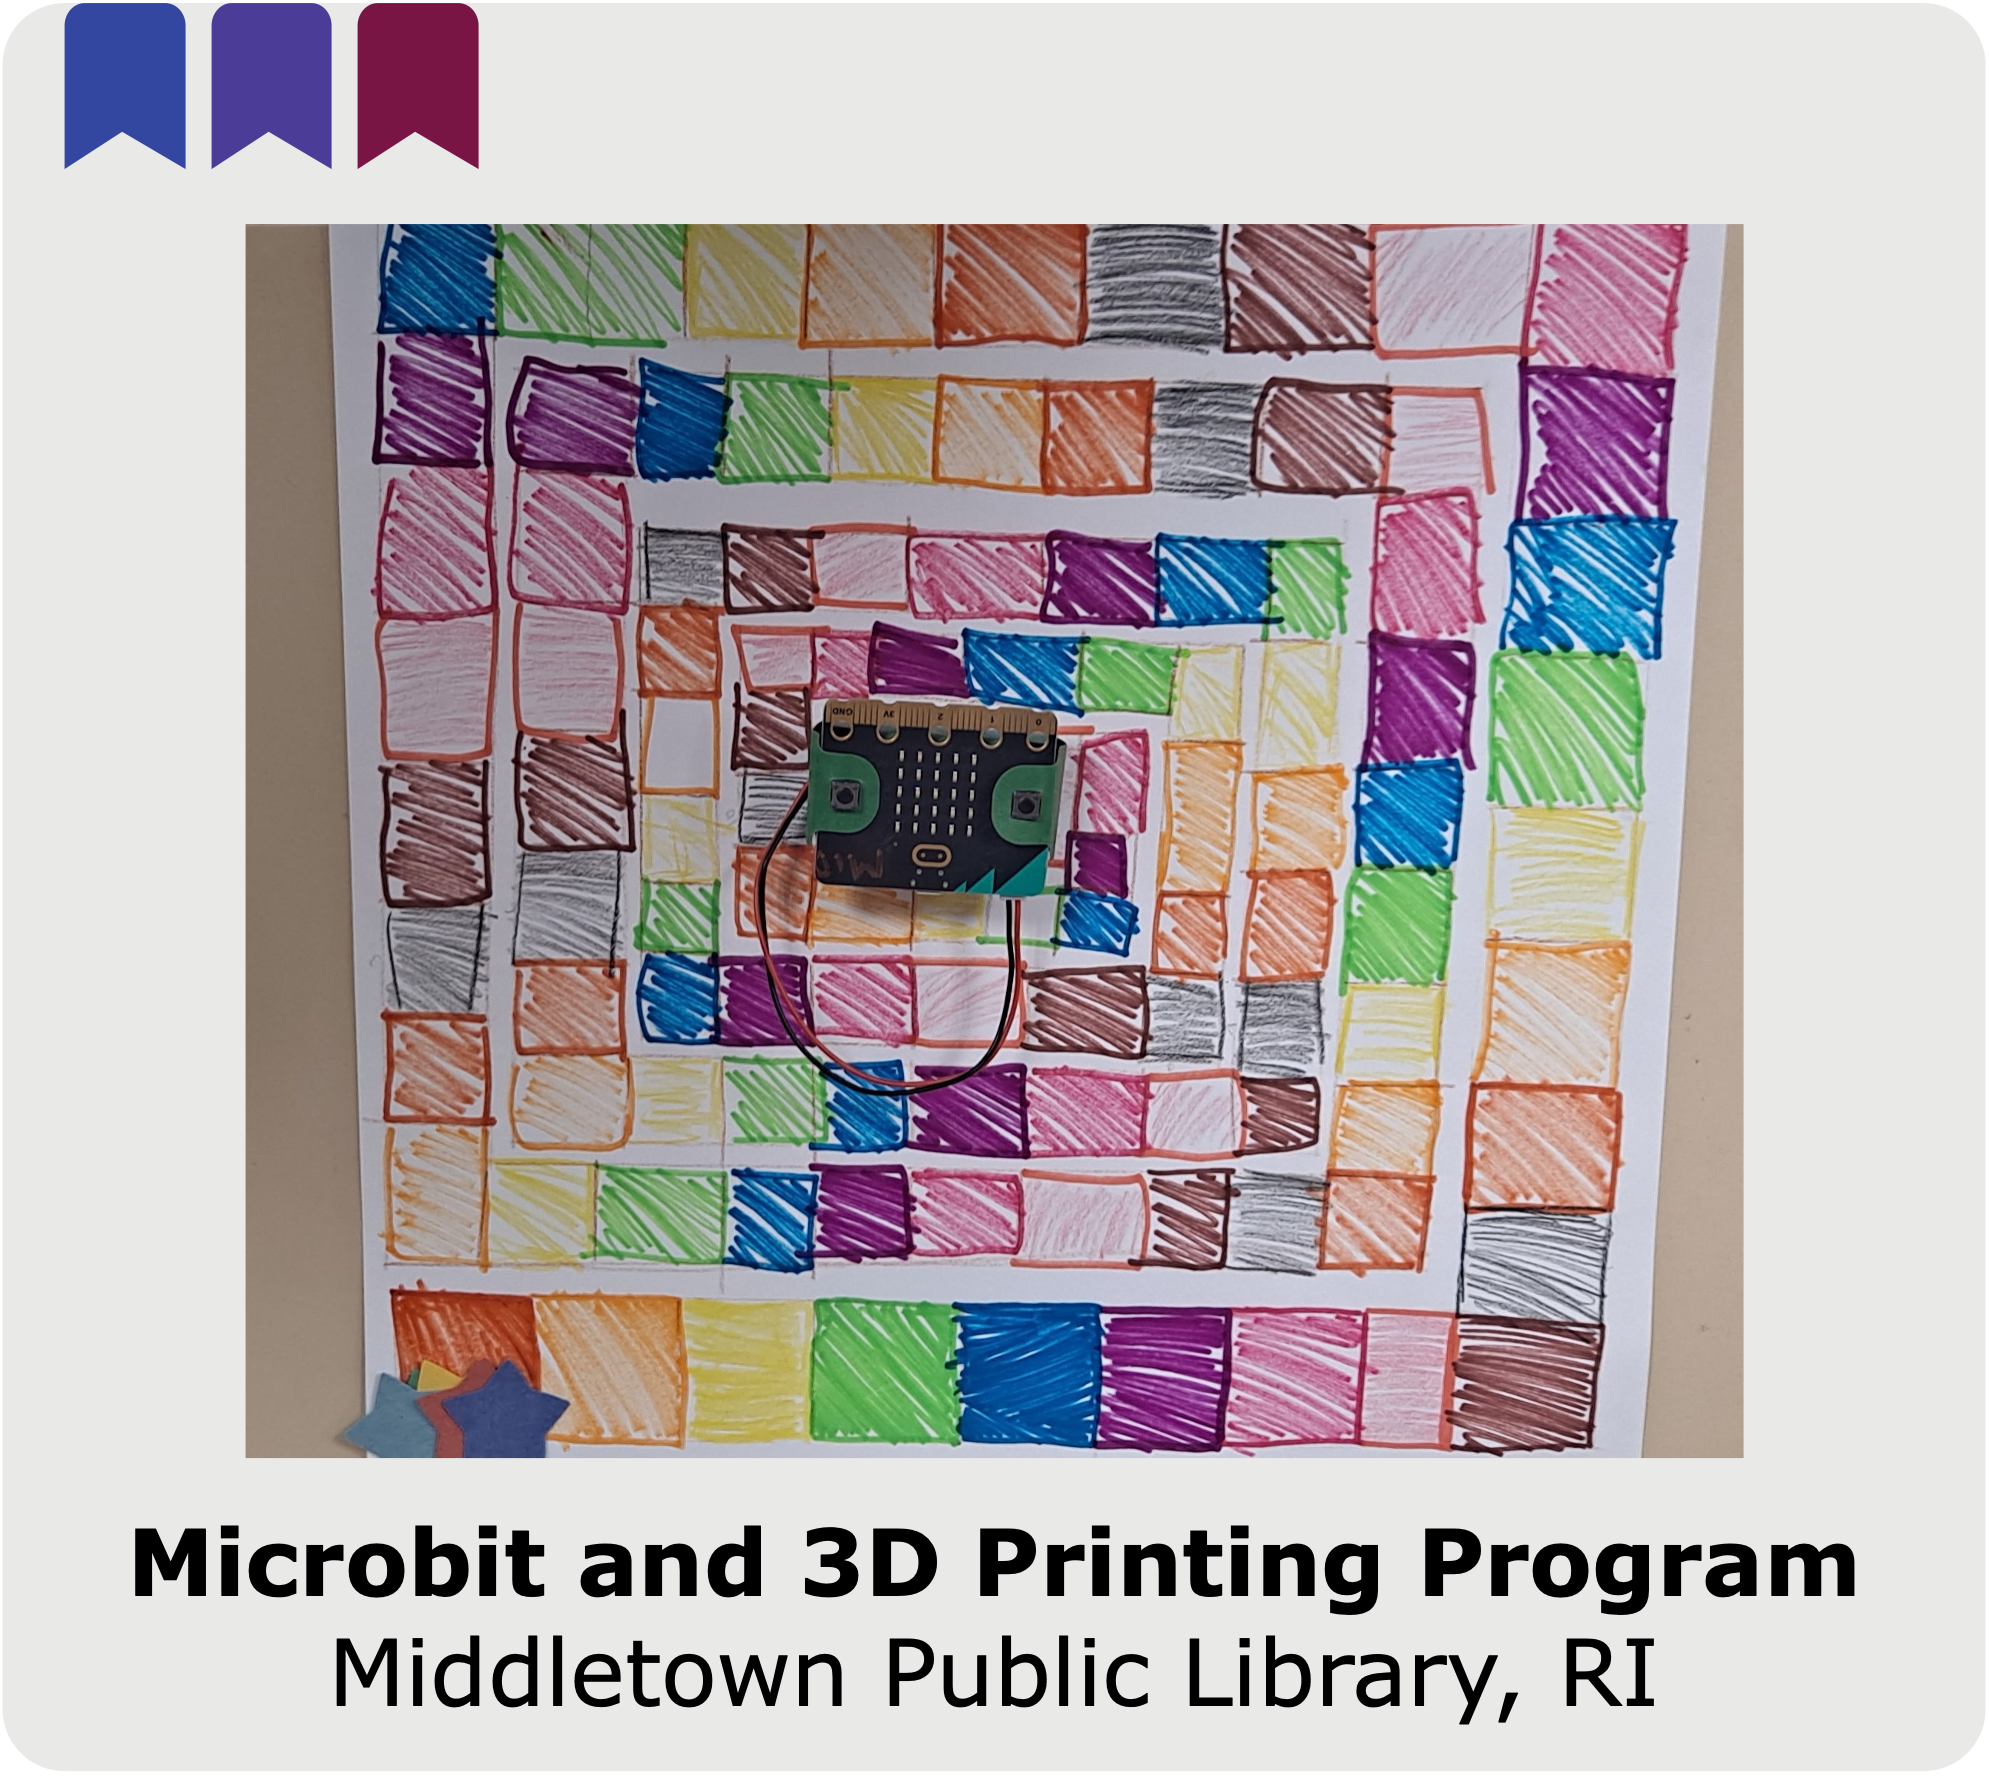 Click to open the case study of the microbit and 3D printing program at Middletown Public Library in Rhode Island. 